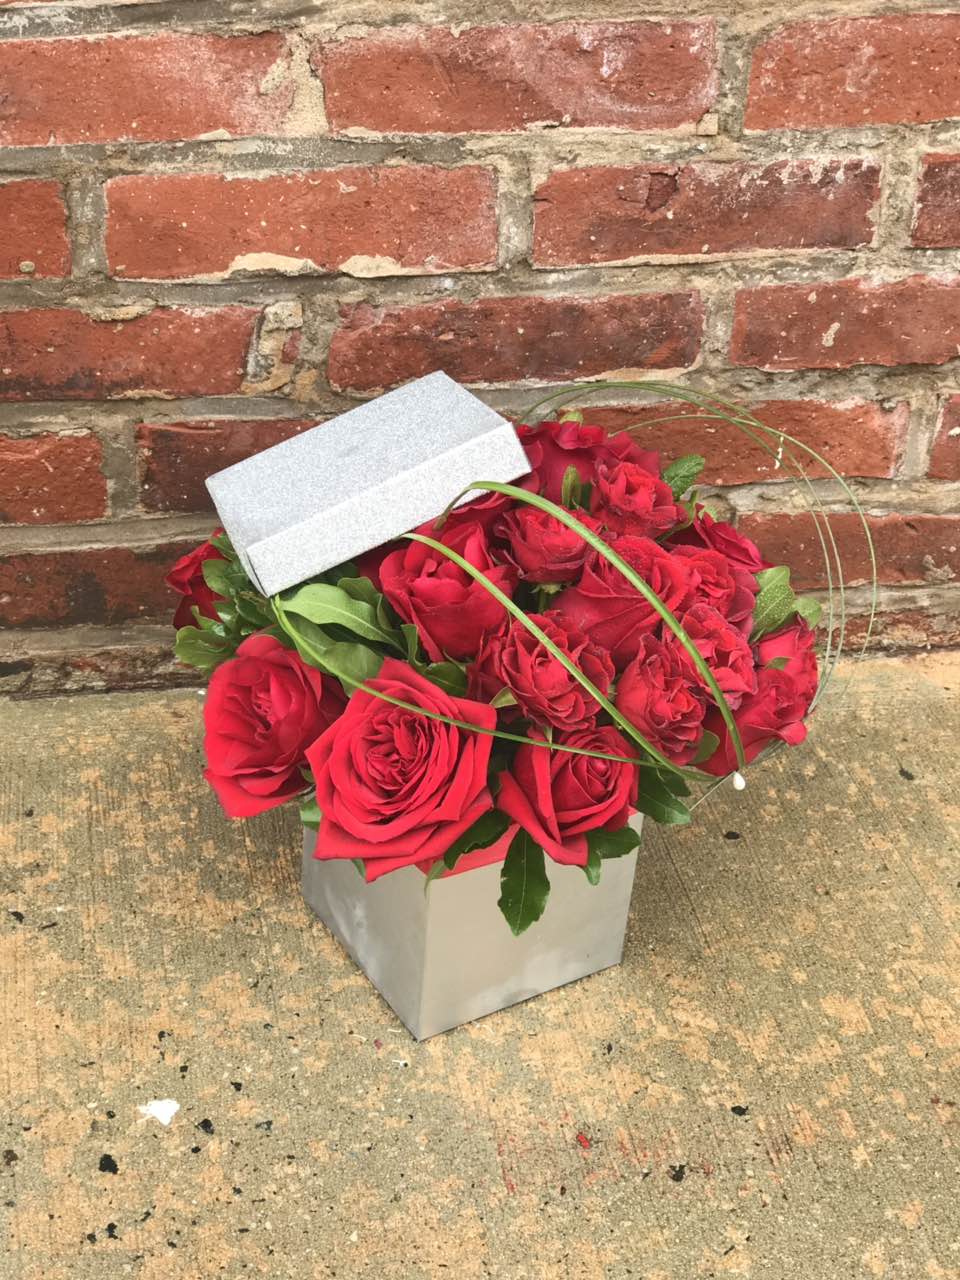 Remember the glorious feeling when you both starting falling in love? Fan the flame with this wildly romantic bouquet.   Includes:  Red roses, assorted greens. Box Free message card